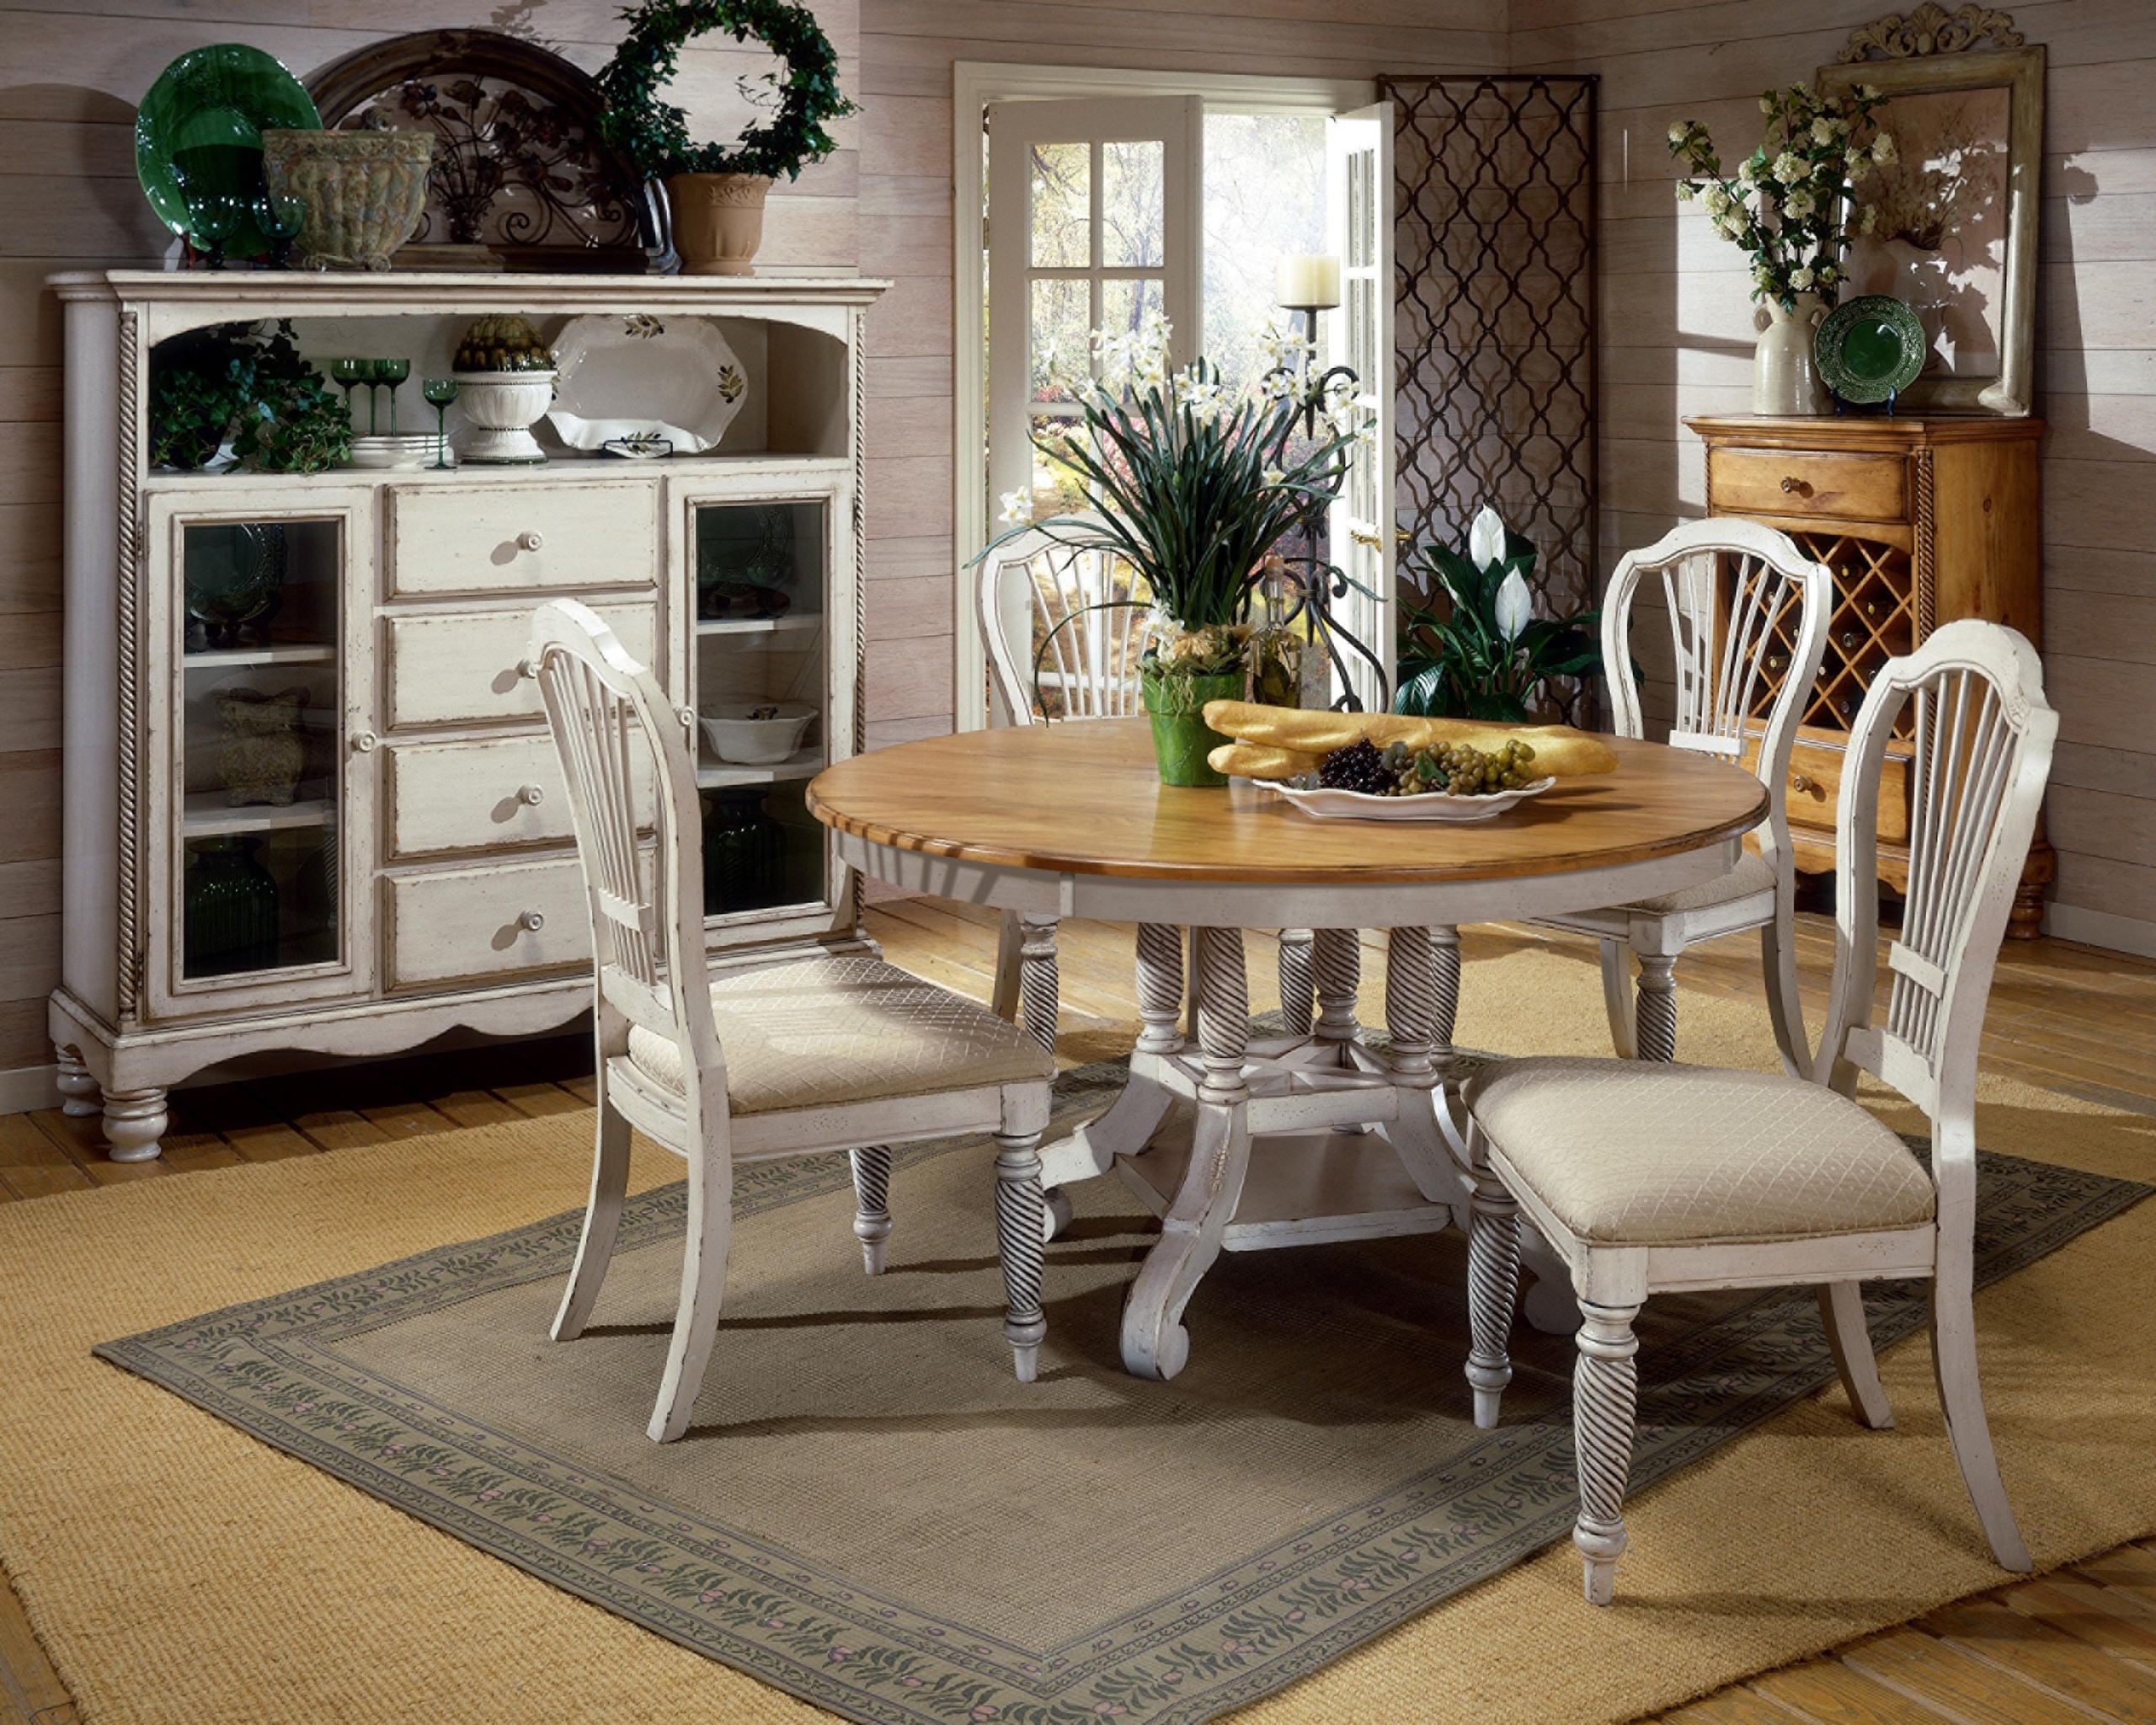 French Country Dining Table You Ll Love, French Country Style Dining Room Tables And Chairs